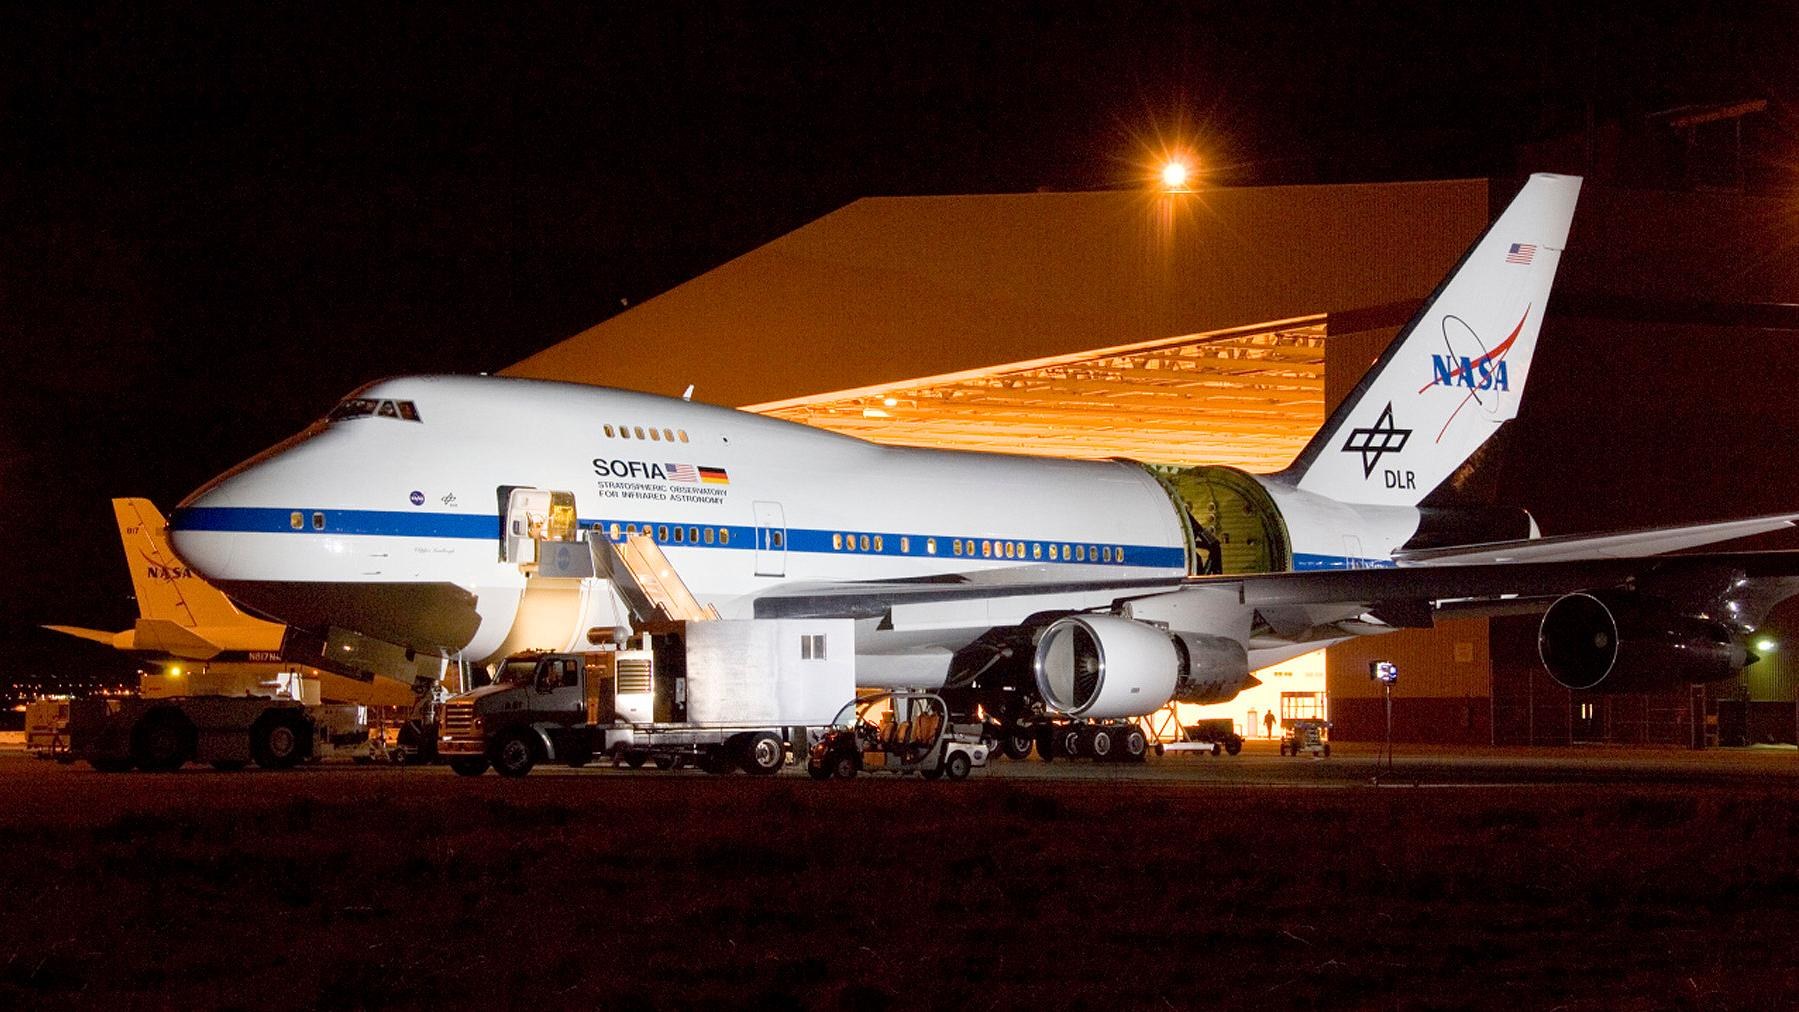 SOFIA during night-time test measurements in front of its hangar in Palmdale